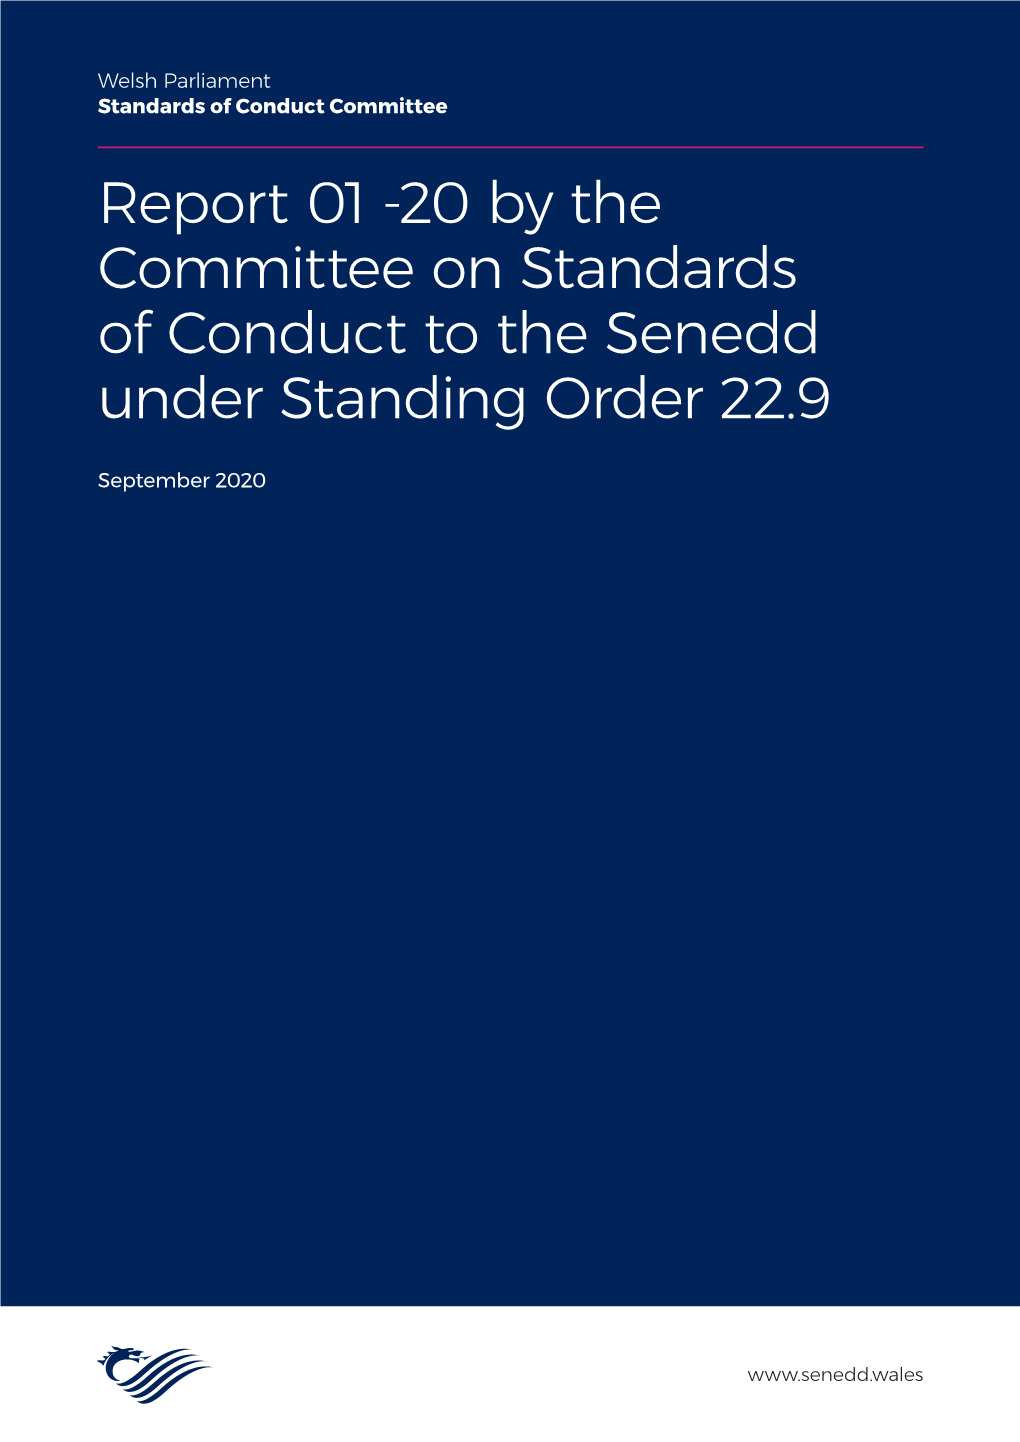 Report 01-20 to the Senedd Under Standing Order 22.9